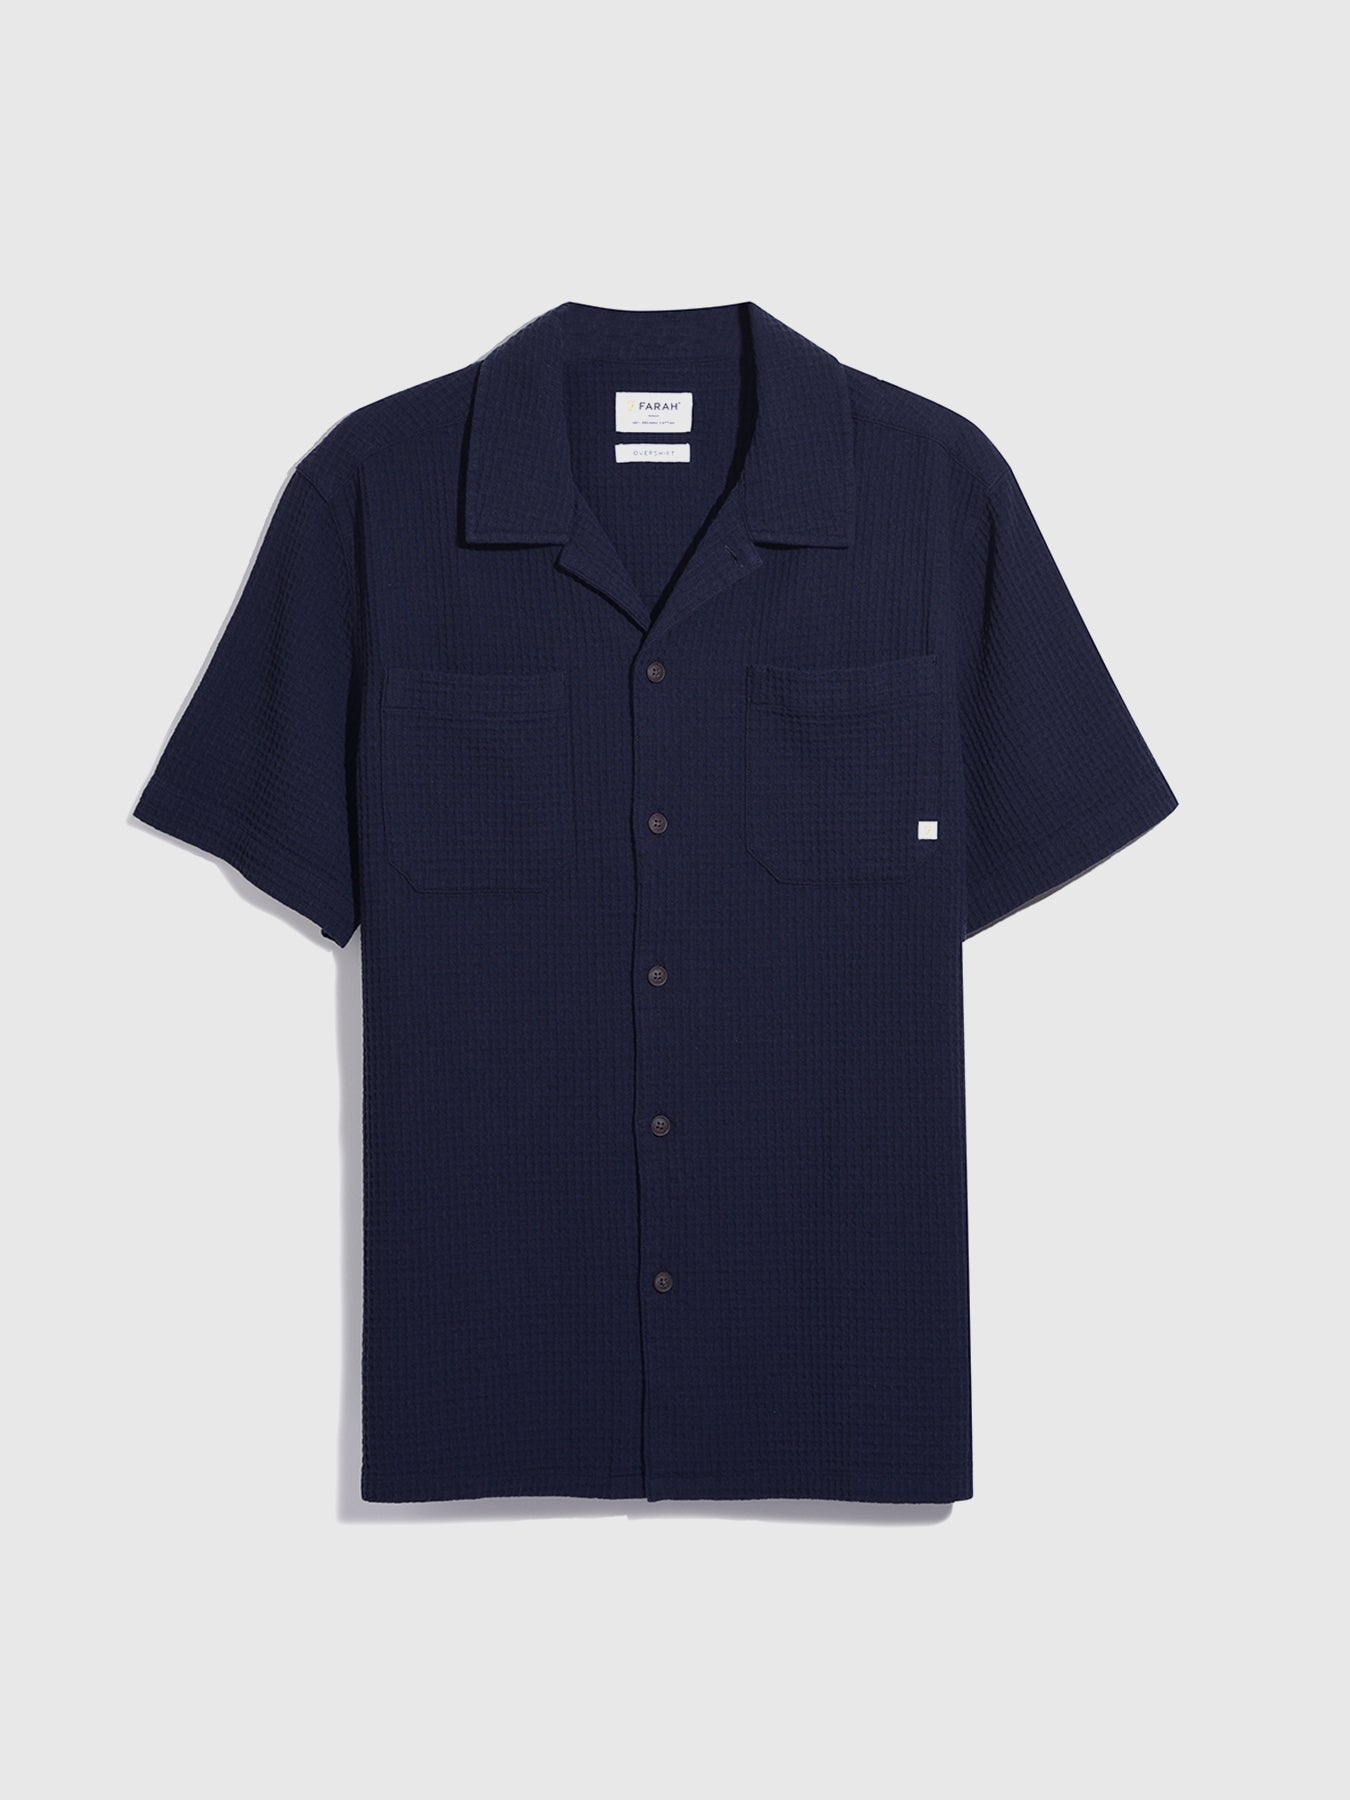 View Fitzgerald Relaxed Fit Short Sleeve Texture Shirt In True Navy information